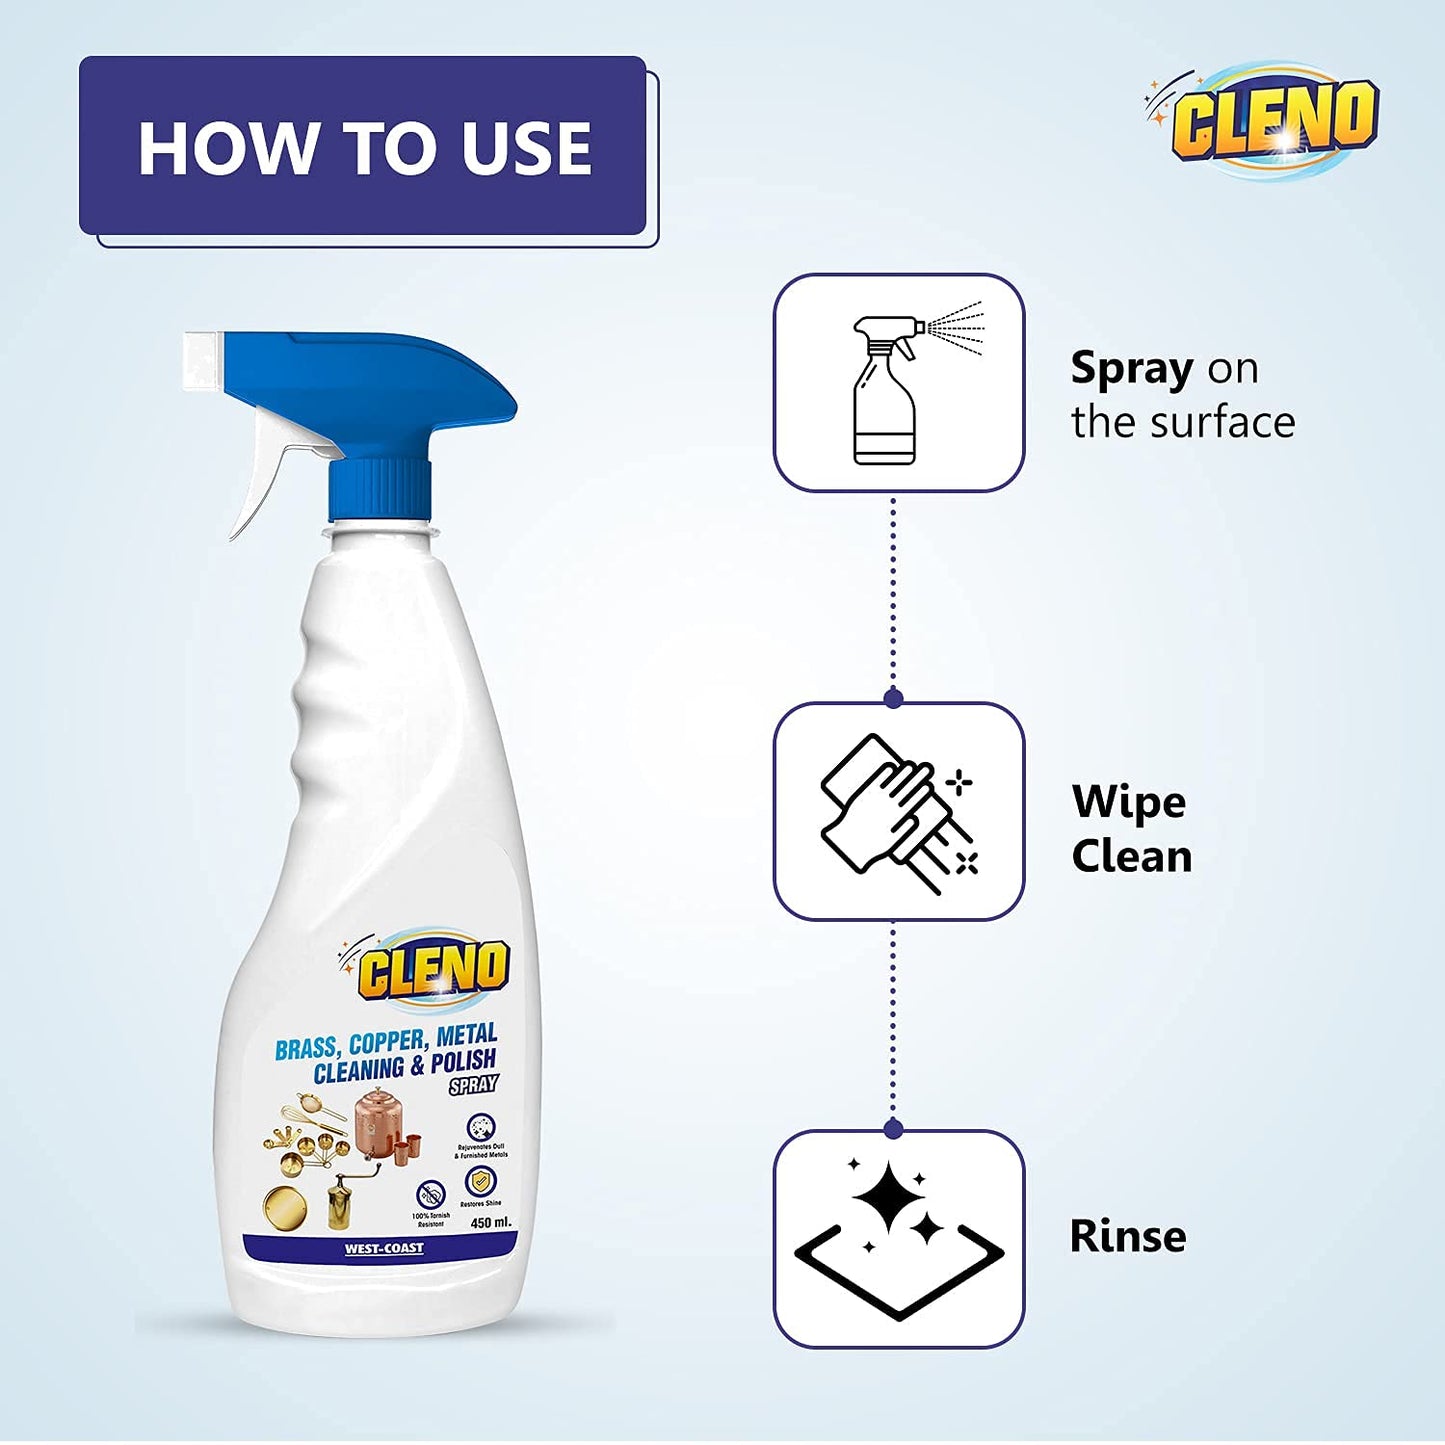 Cleno Heavy Duty Brass Copper Metal Cleaning  Polish Spray  All Metal Objects at Your HomeChromeCopperBrassBronzeNickelEco-friendly - 450 ml Ready to Use